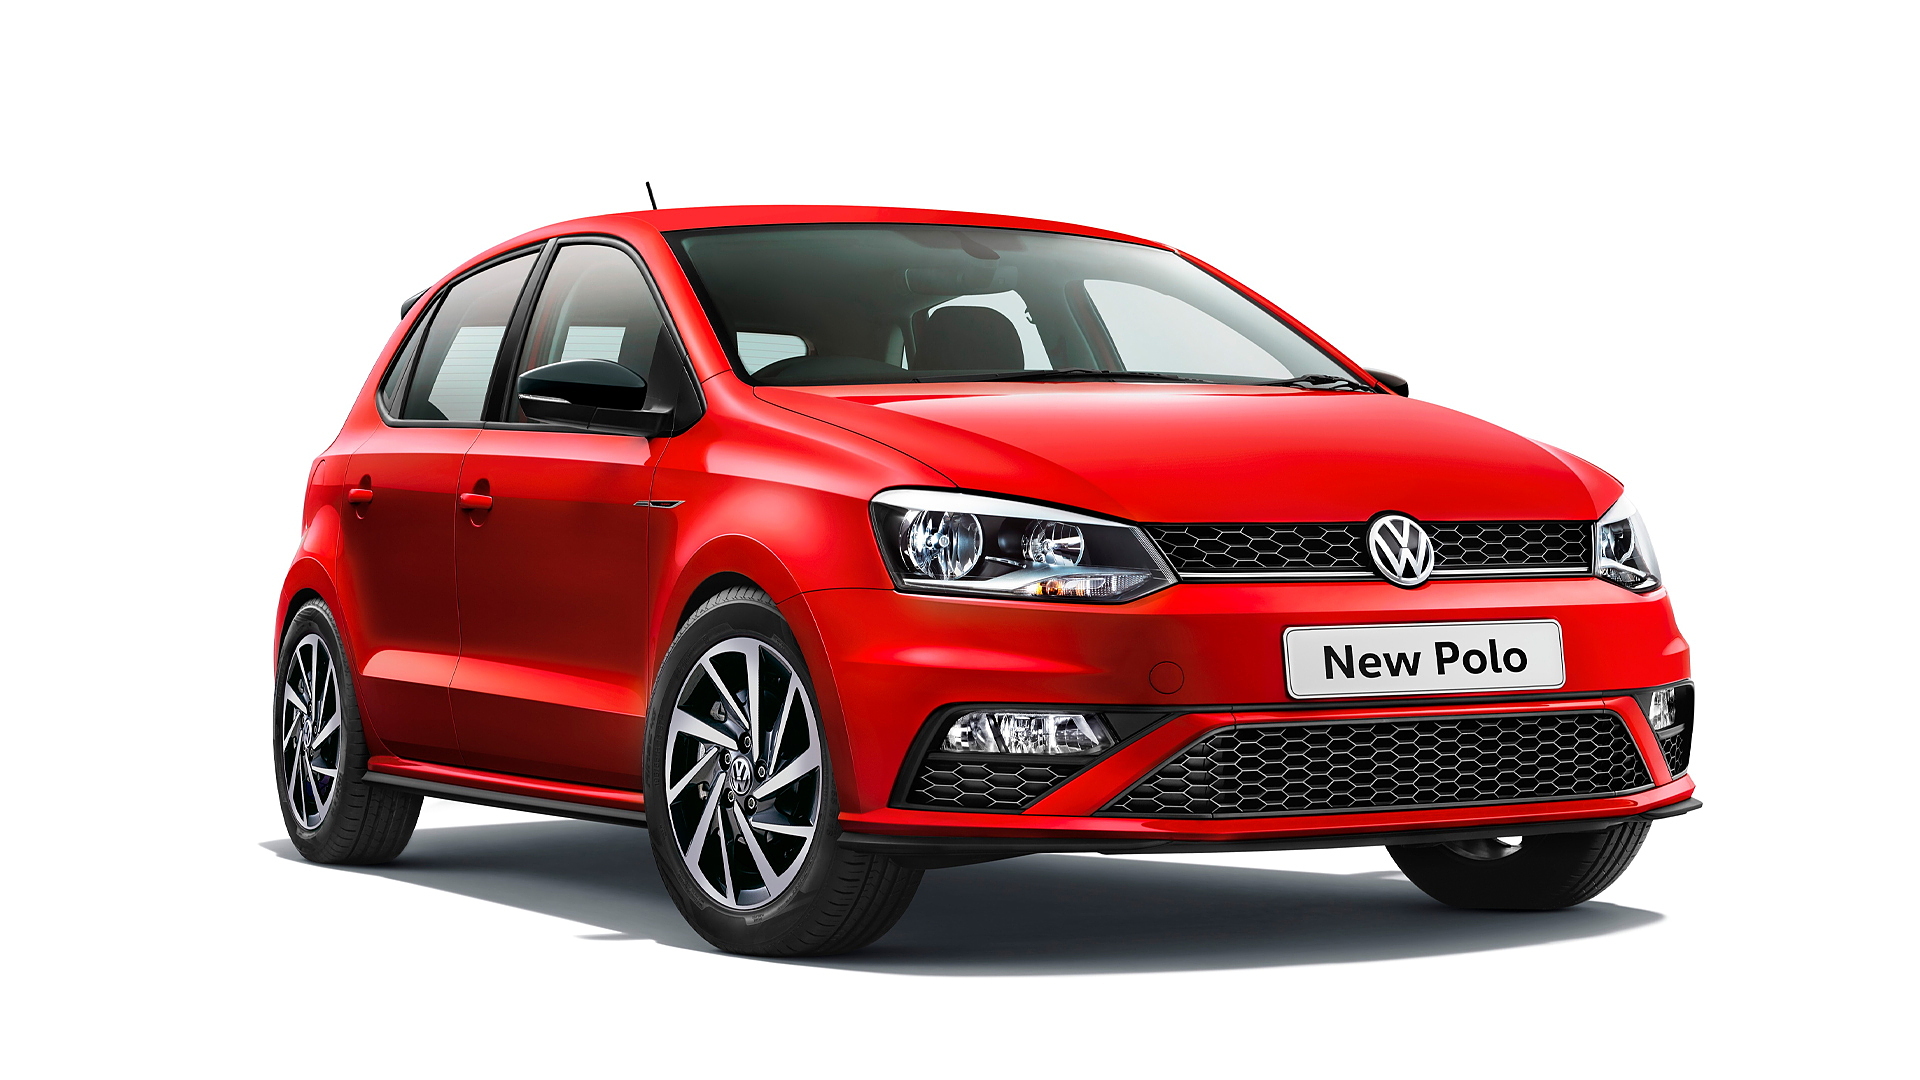 spijsvertering Donder Wanten Discontinued Polo Turbo Edition 1.0L TSI on road Price | Volkswagen Polo  Turbo Edition 1.0L TSI Features & Specs